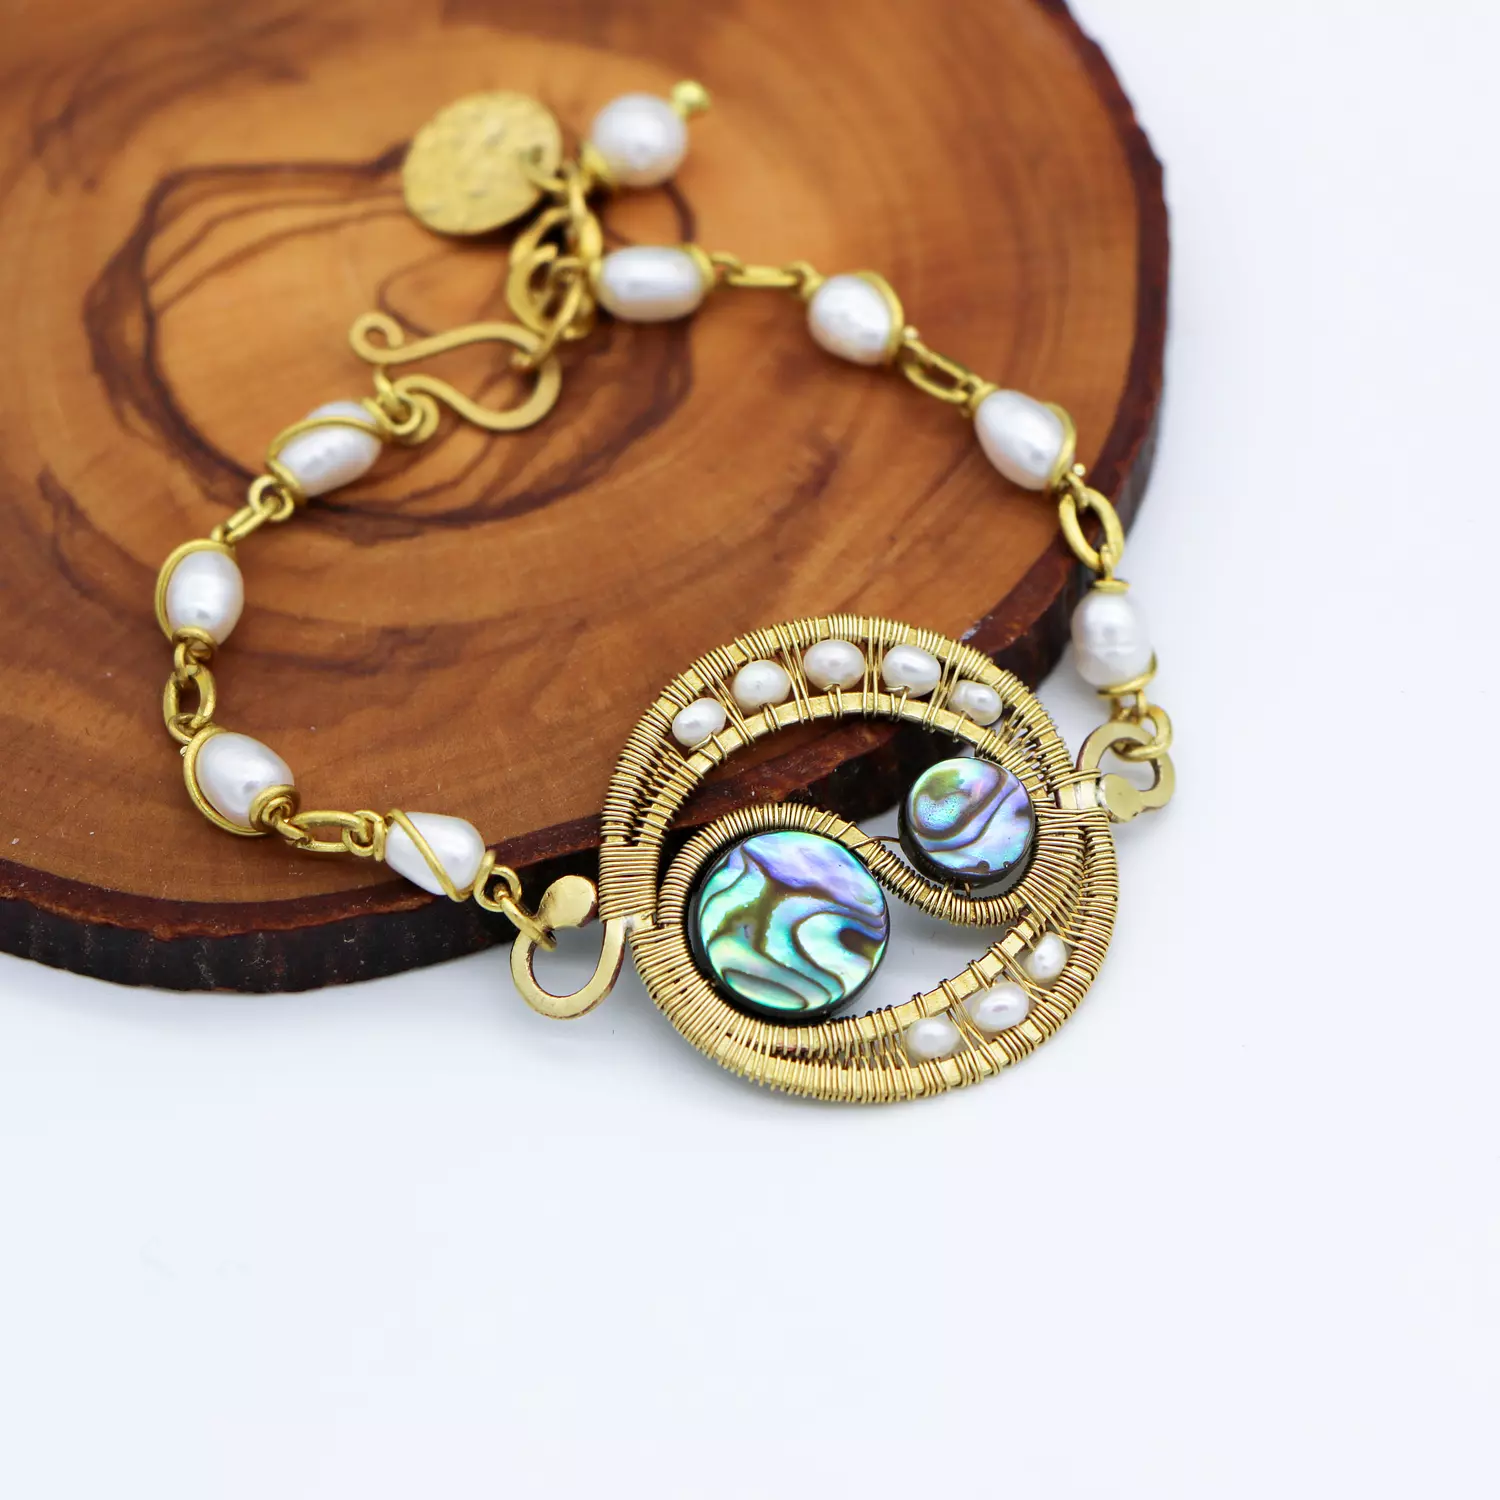 Brass bracelet with pearls and abalone shells. hover image